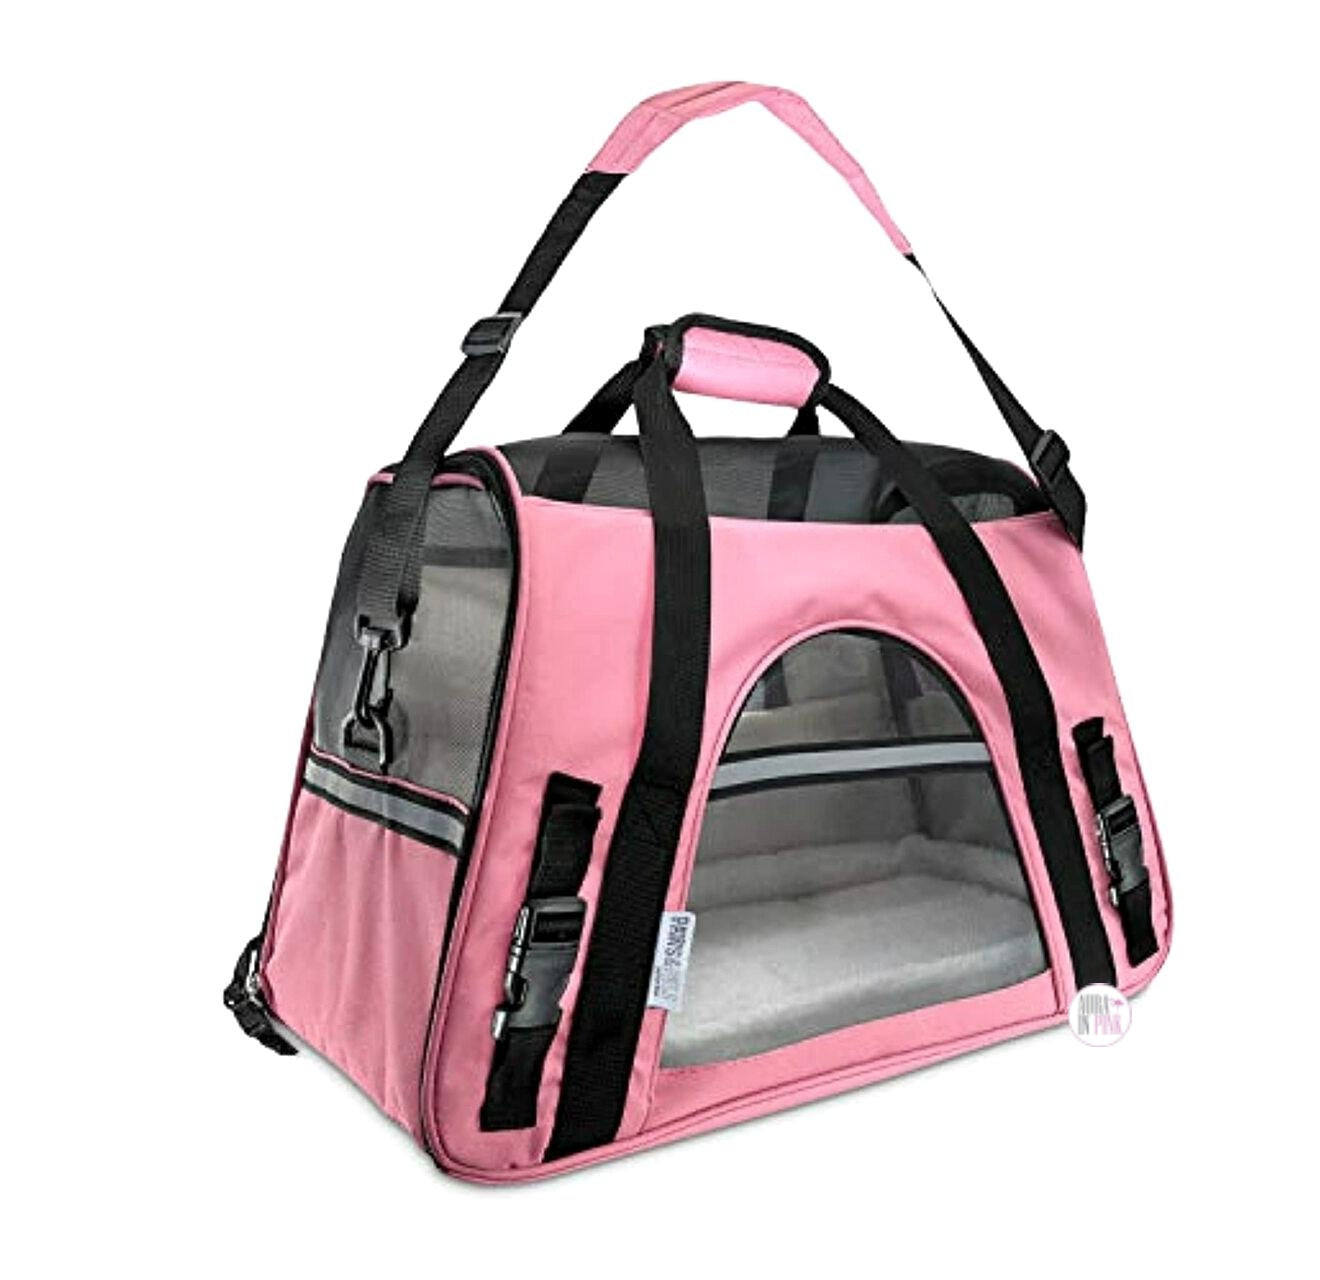 Paws & Pals Airline Approved Pink Cozy Commuter Soft Pet Travel Carrier Bag